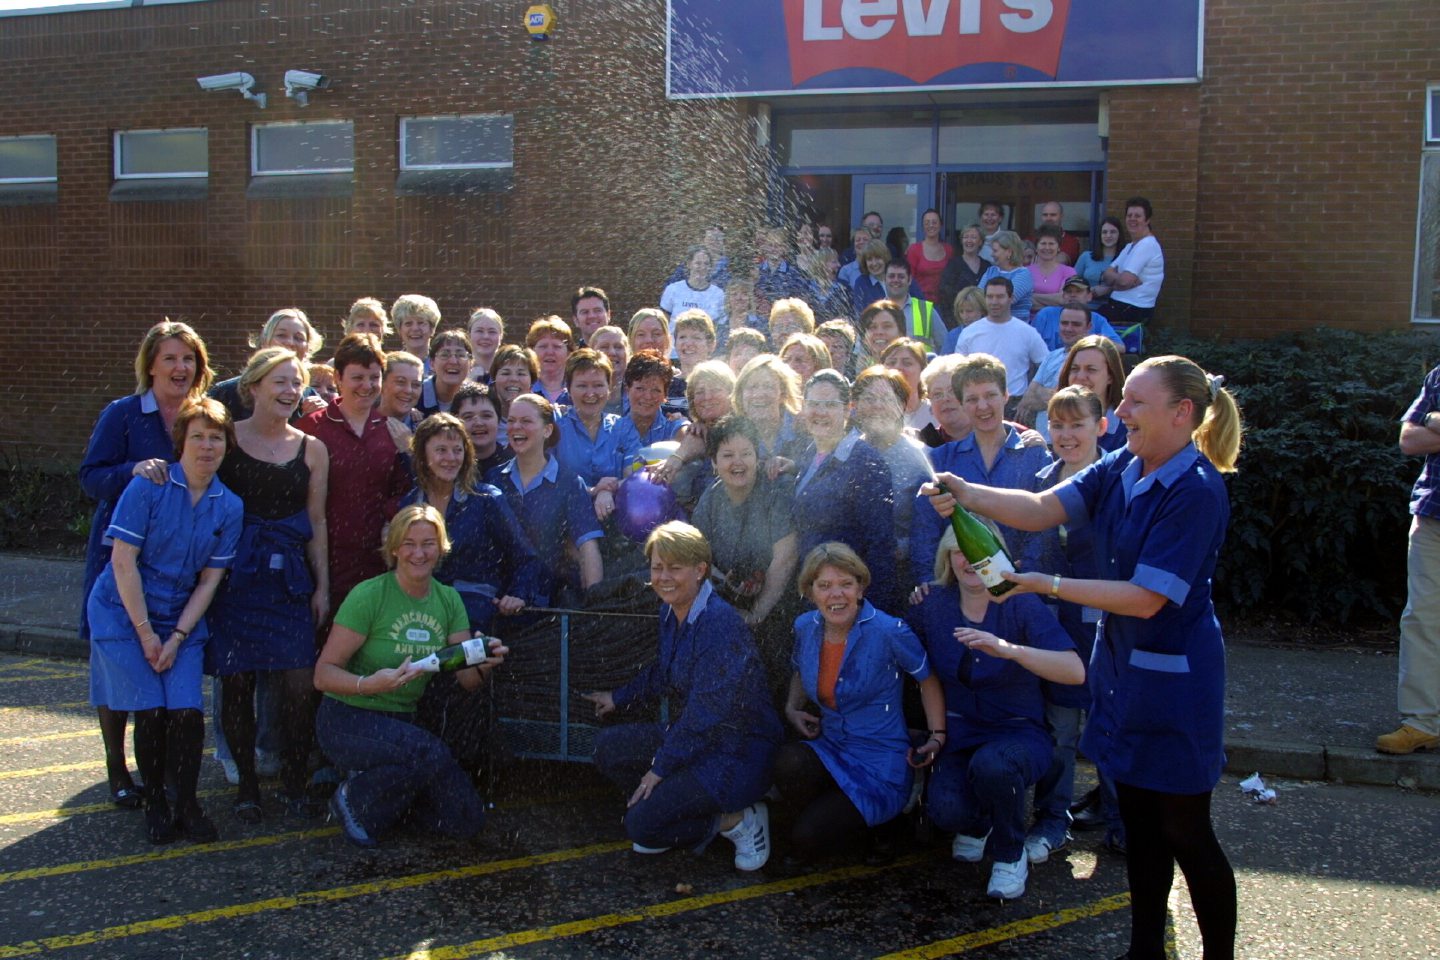 Champagne corks popped on what was the last day for the staff at the Levi's factory, Dundee.